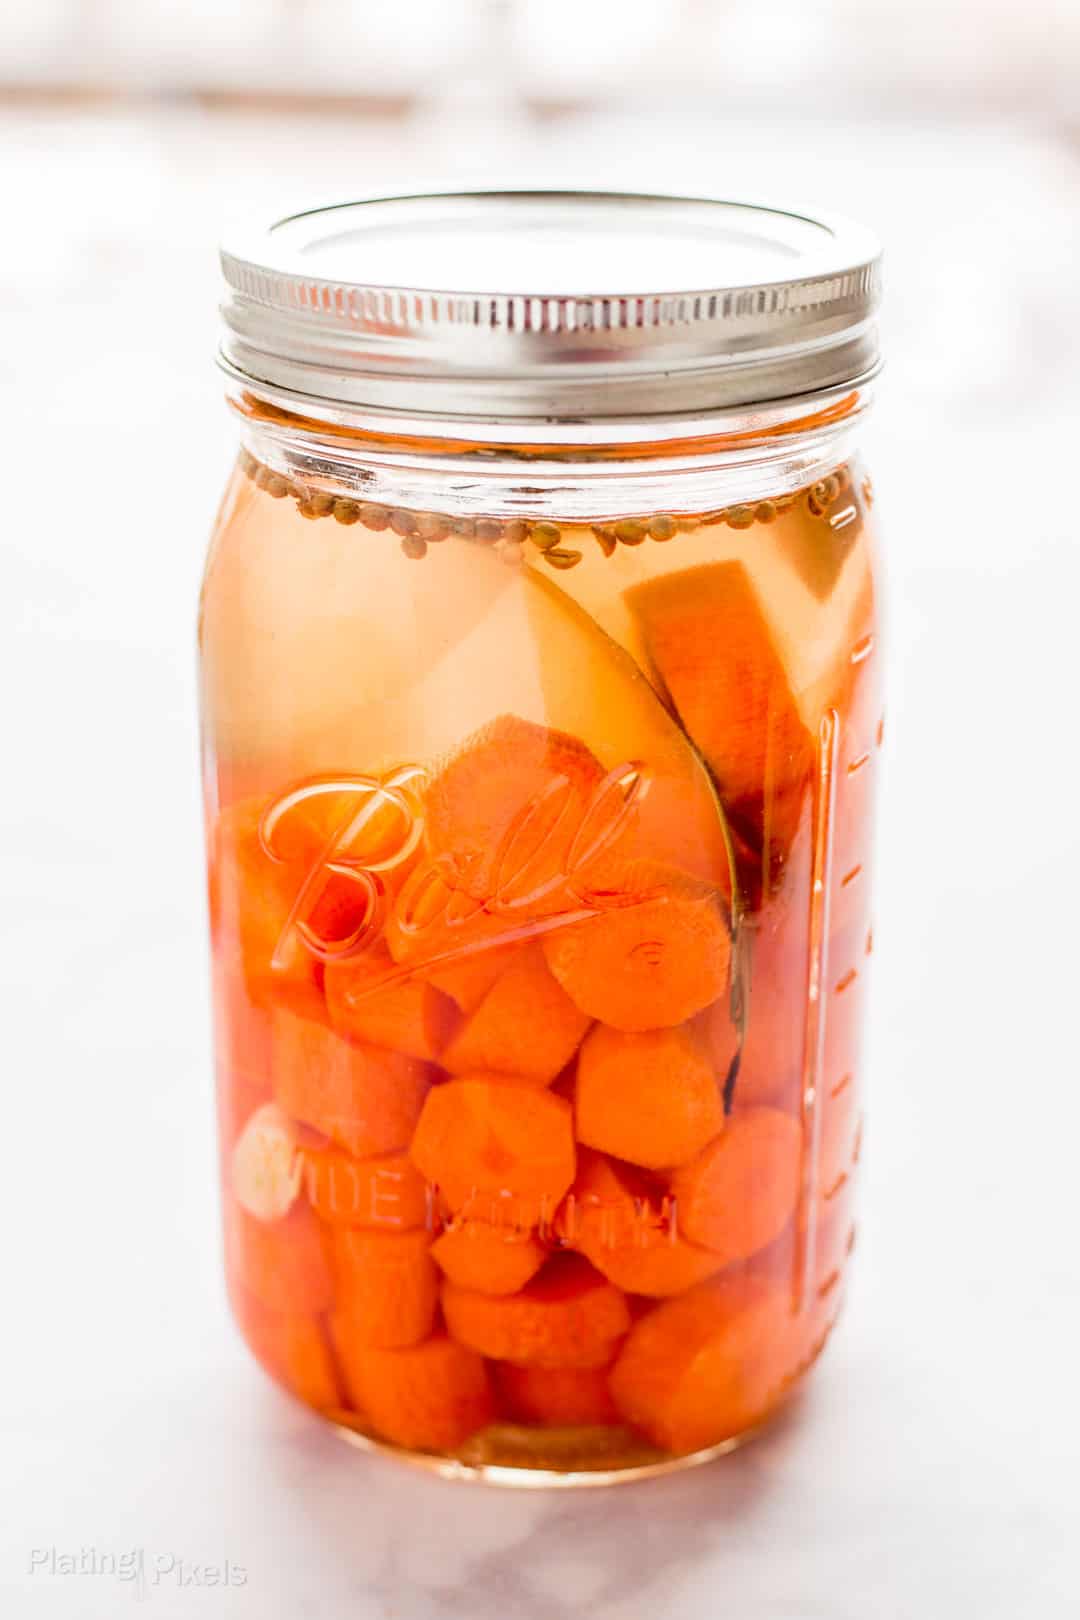 Carrots fermenting in a mason jar to make pickled carrots